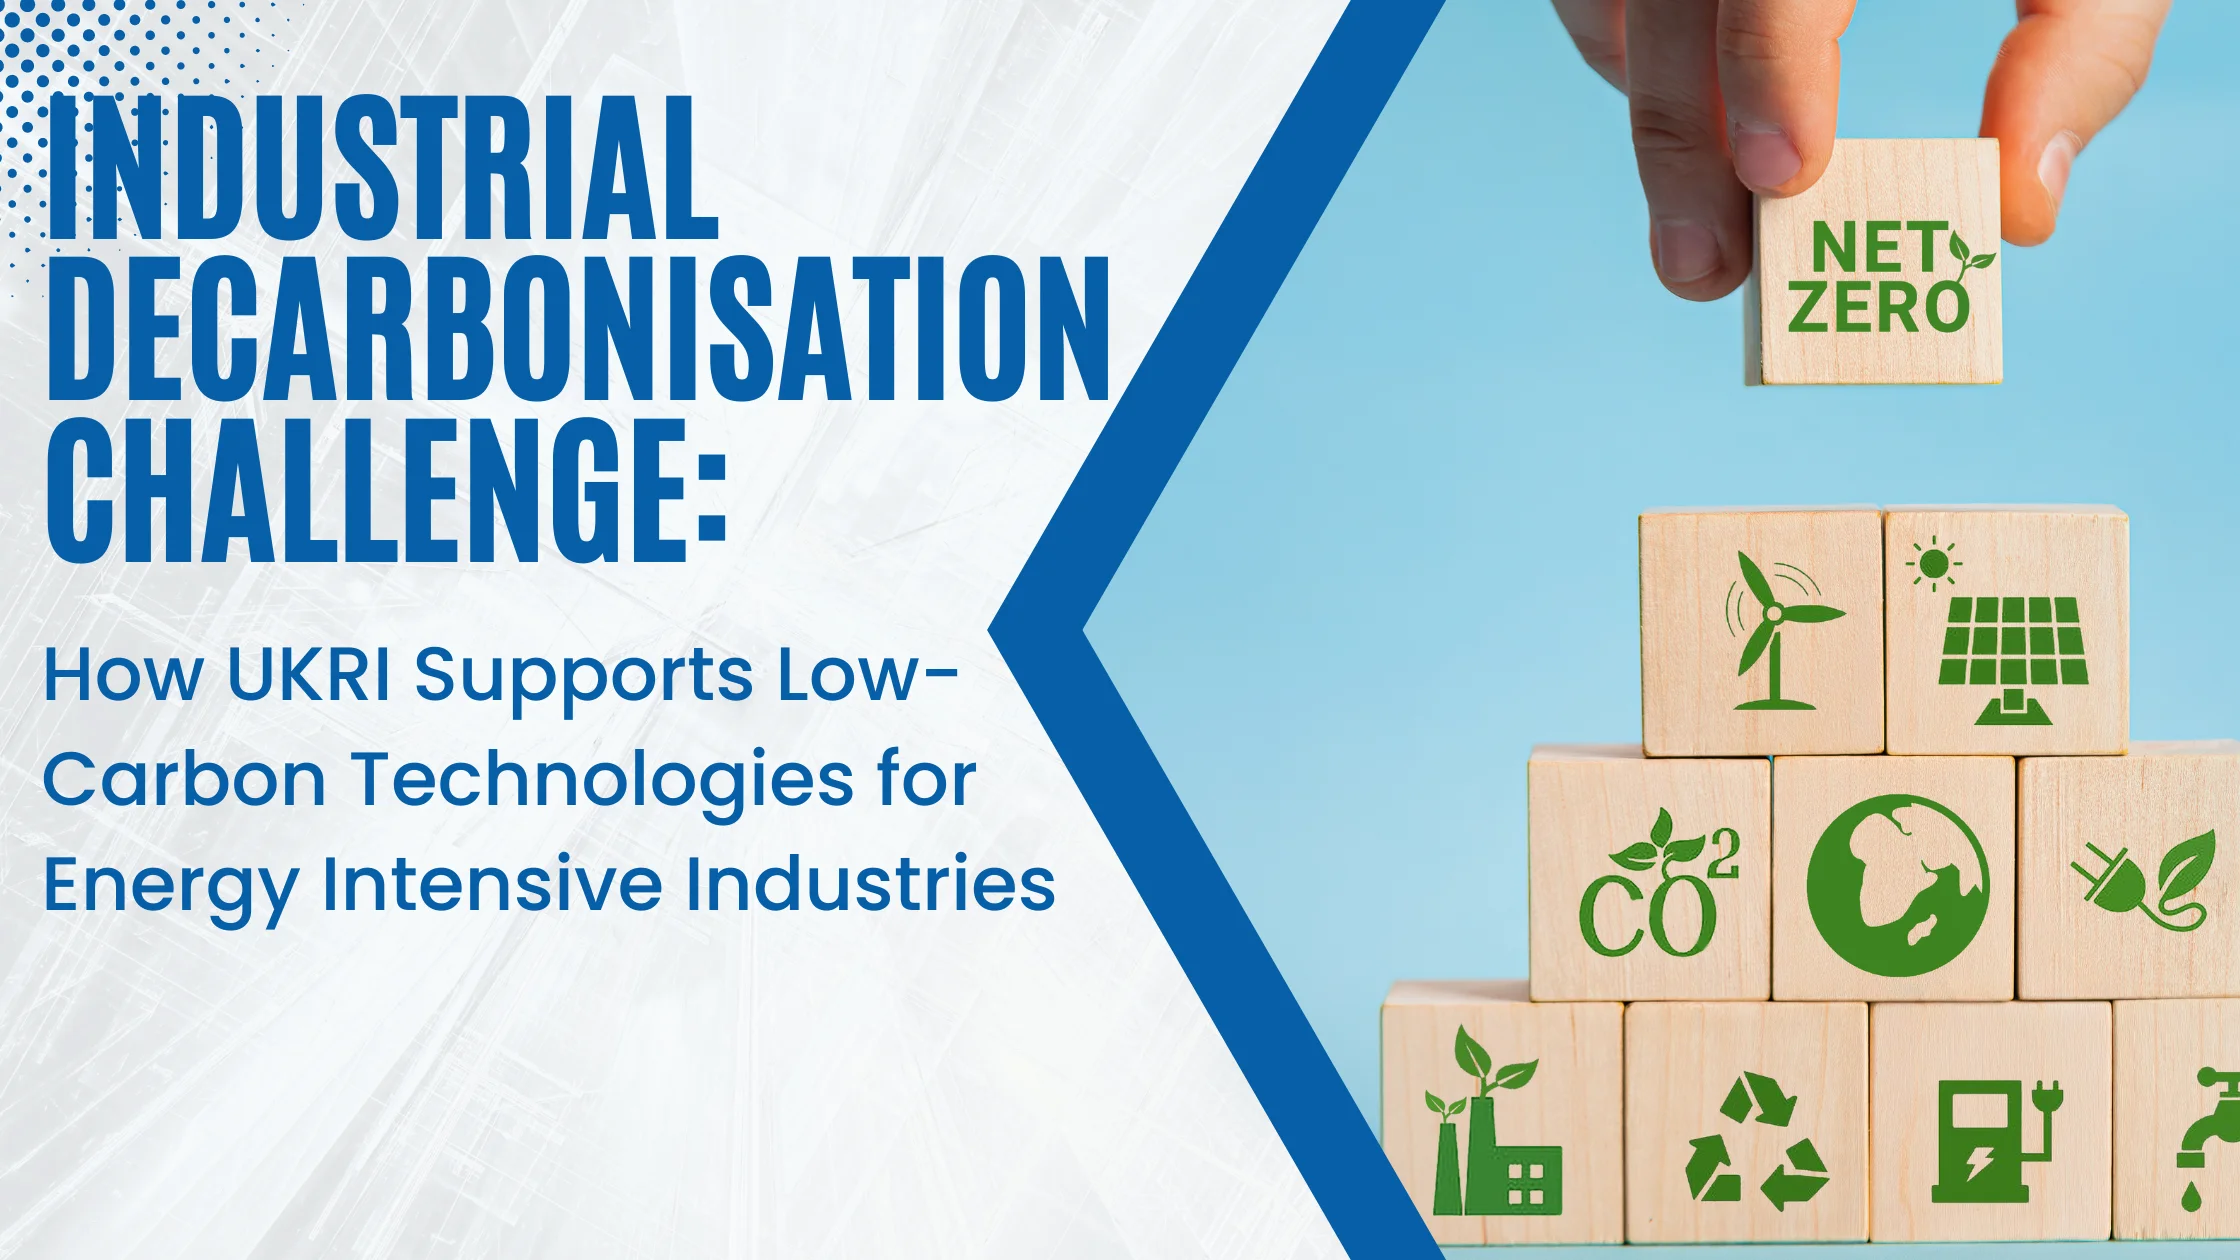 Industrial Decarbonisation Challenge How UKRI Supports Low-Carbon Technologies for Energy Intensive Industries